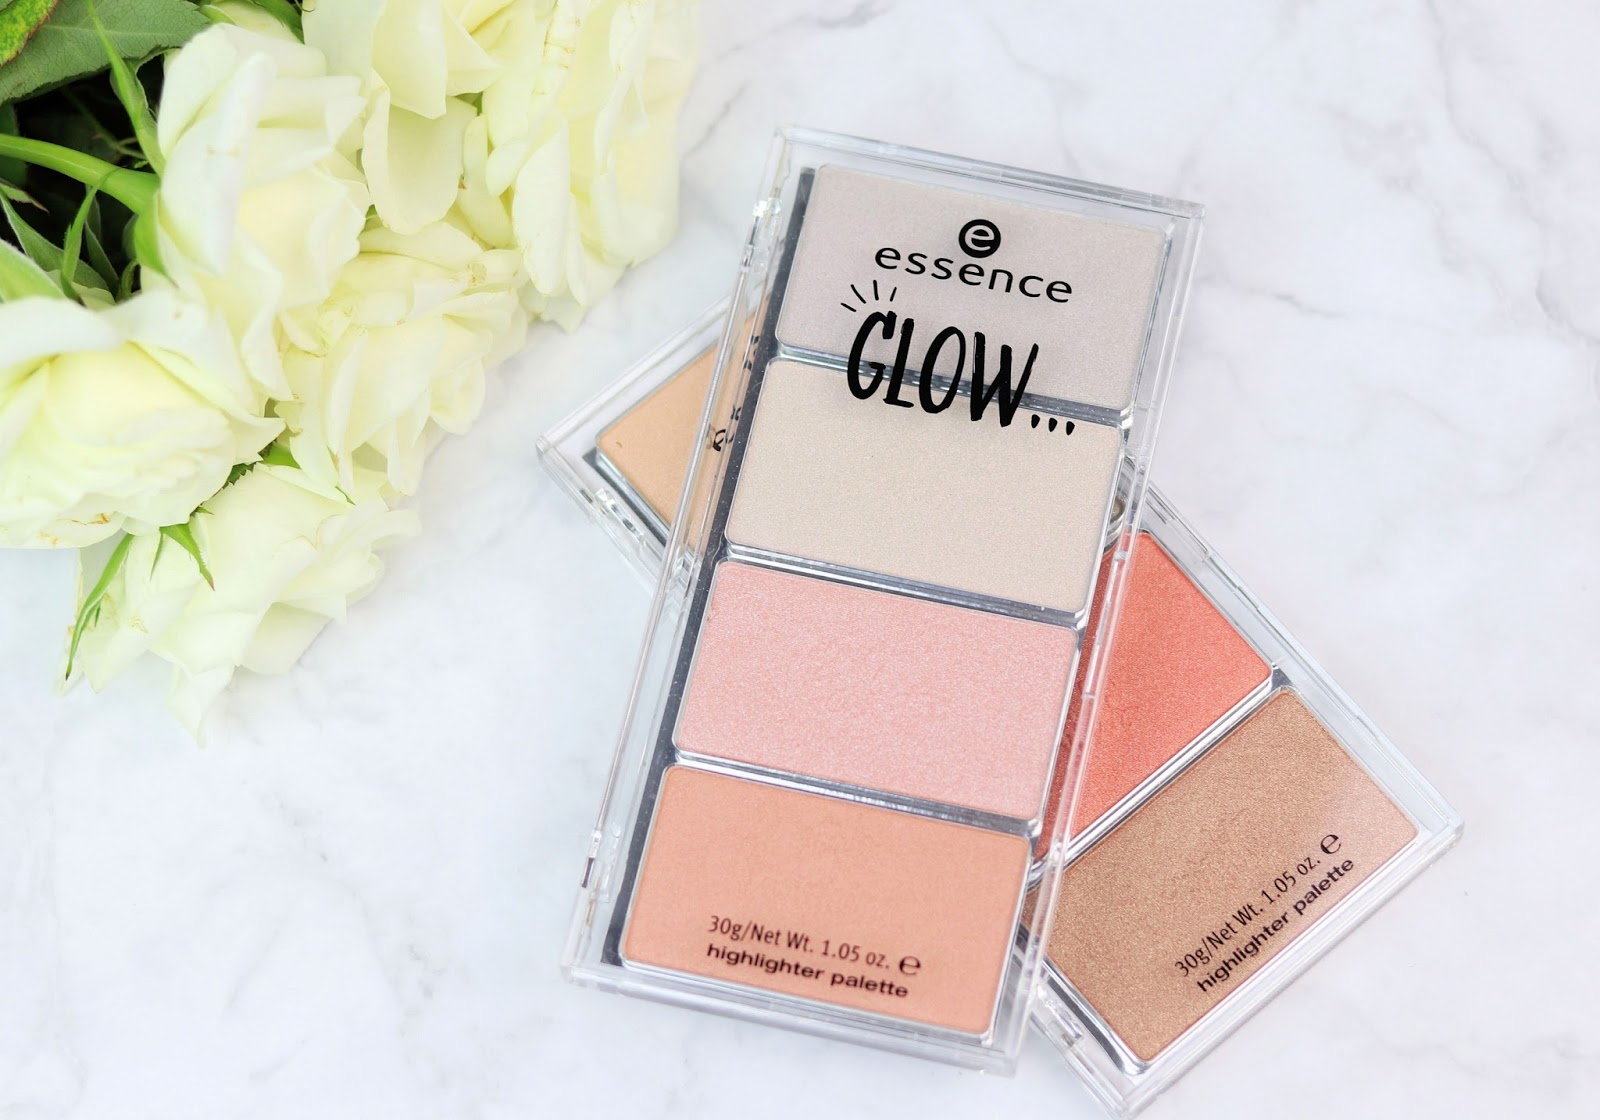 Dewy Finish, essence glow like..., highlighter, highlighting drops, Holographic Loose Powder, limited edition, liquid highlighter, metallic, palette, review, stick, strahlender look, Strobing, swatches, wet look, 